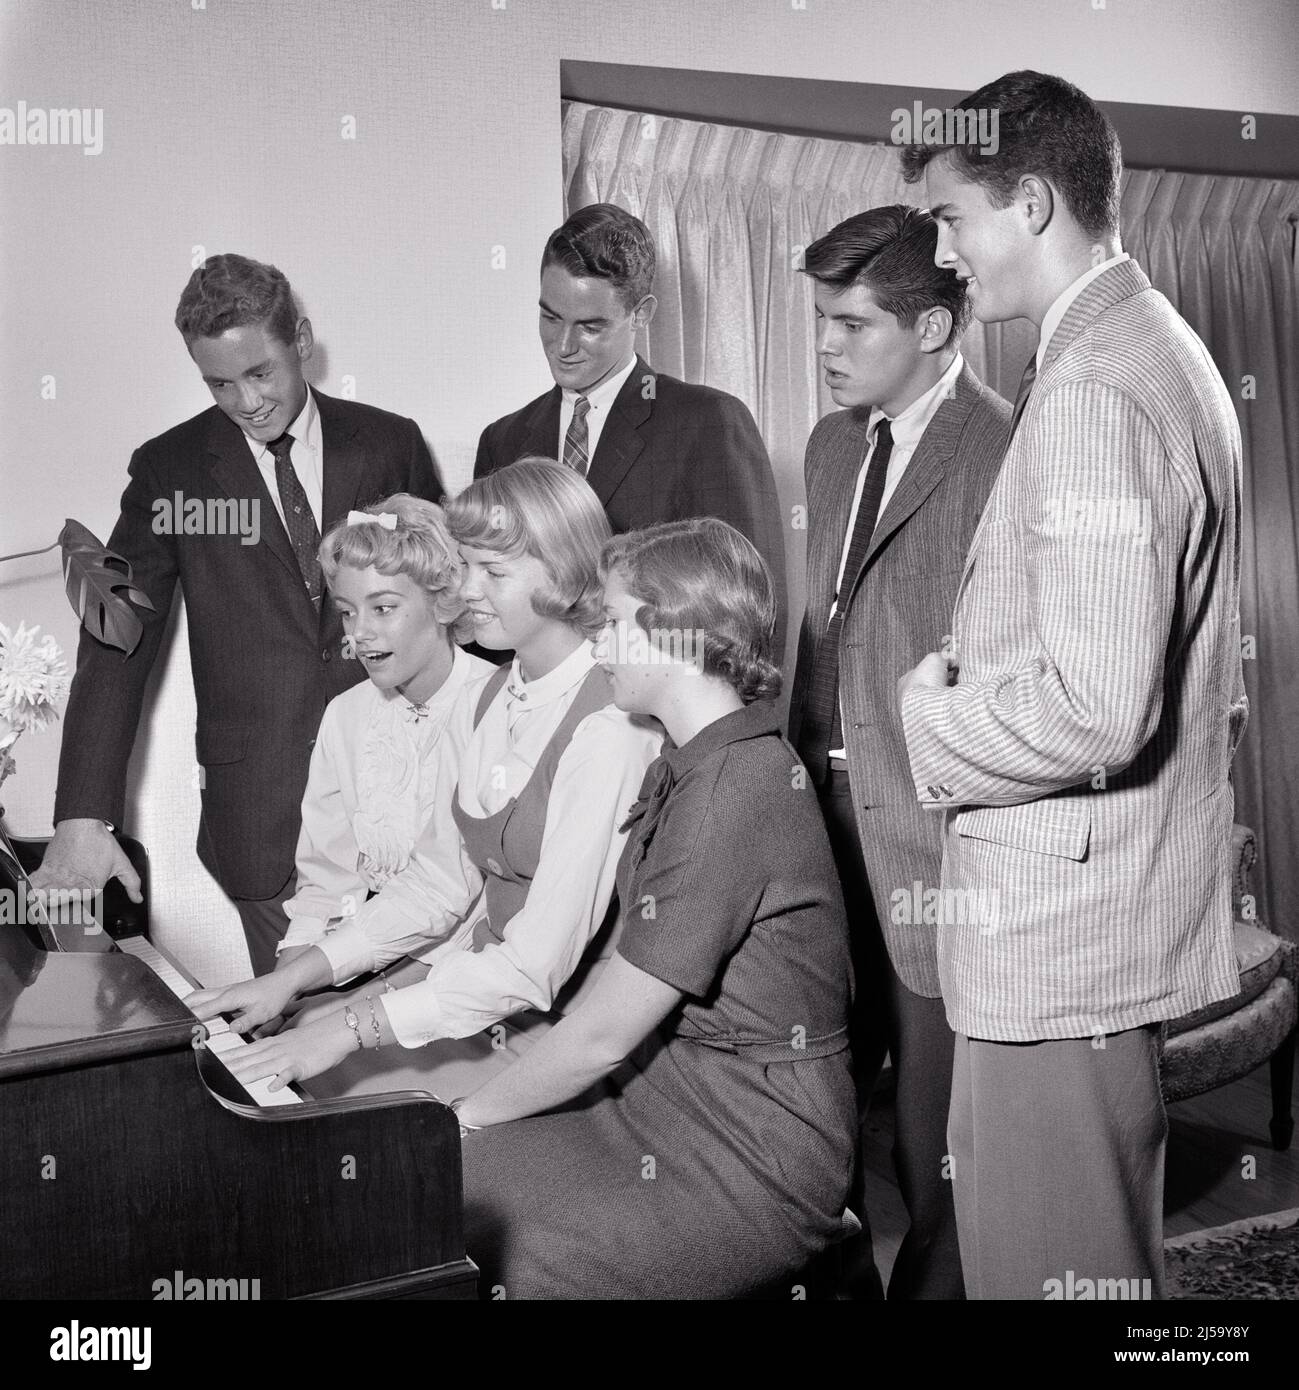 1950s GROUP OF SEVEN TEENAGERS BOYS AND GIRLS AROUND A PIANO PLAYING AND SINGING - j189 HAR001 HARS SINGERS JOY LIFESTYLE SOUND SATISFACTION MUSICIAN CELEBRATION FEMALES HOUSES COPY SPACE FRIENDSHIP HALF-LENGTH PERSONS INSPIRATION RESIDENTIAL MALES TEENAGE GIRL TEENAGE BOY BUILDINGS ENTERTAINMENT B&W SCHOOLS SUIT AND TIE HAPPINESS AND EXCITEMENT RECREATION SONG VOCAL PRIDE OPPORTUNITY ENTERTAINER HIGH SCHOOL HOMES MUSICAL INSTRUMENT HIGH SCHOOLS CONNECTION VOCALIZE CONCEPTUAL VOCALS 7 RESIDENCE SONGS STYLISH TEENAGED CHORAL COOPERATION GROWTH JUVENILES TOGETHERNESS BLACK AND WHITE Stock Photo